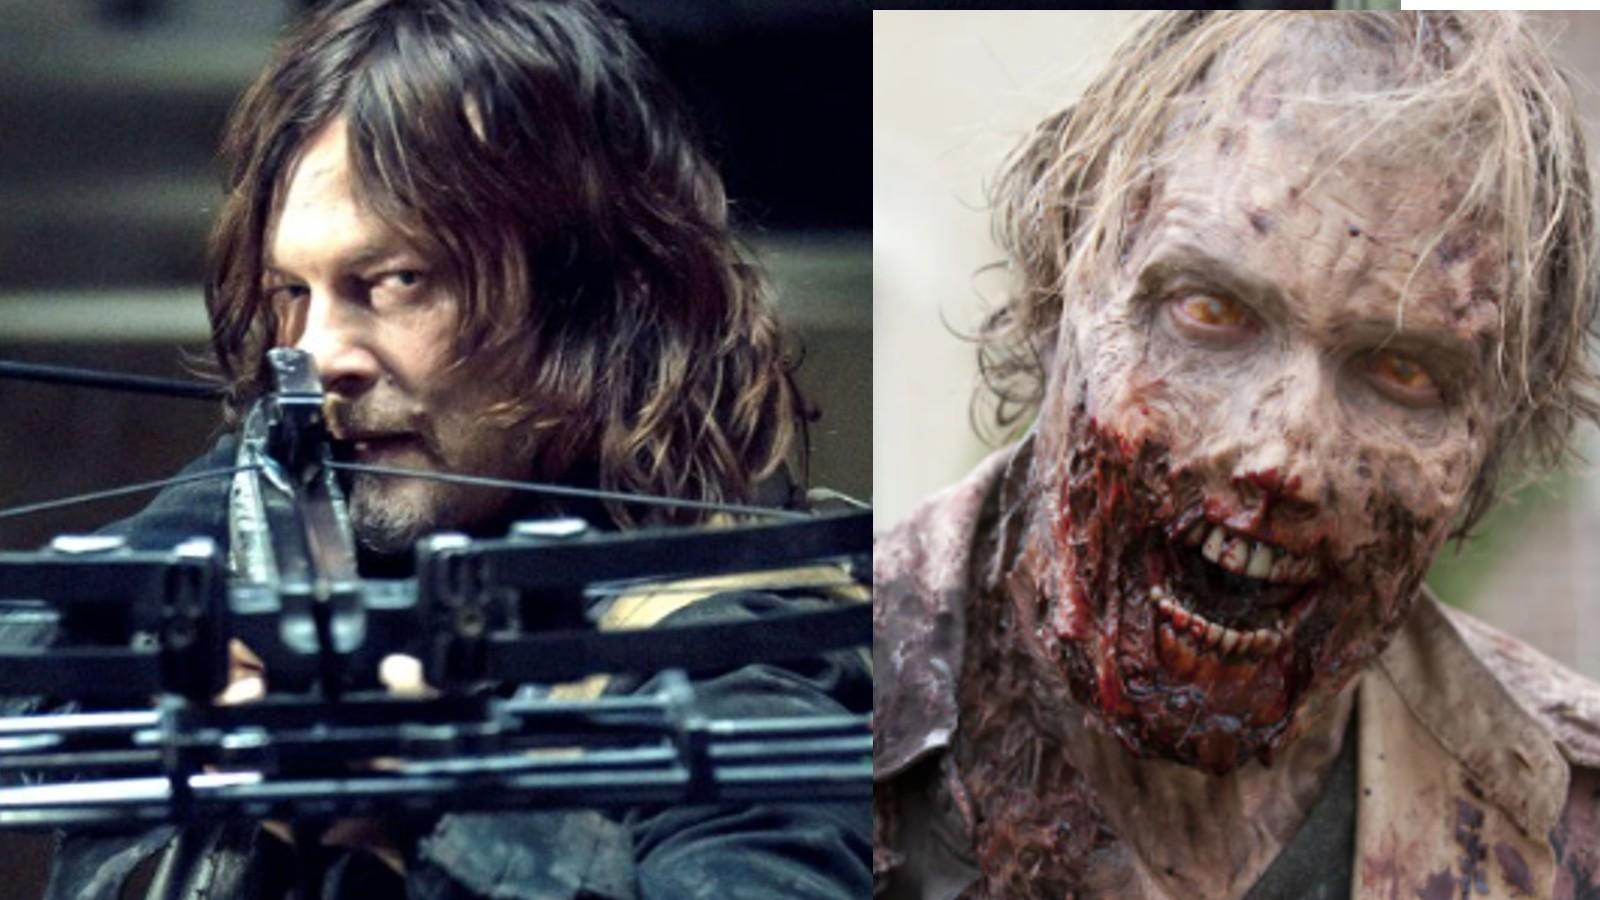 Daryl Dixon holds a cross bow and a Walker from The Walking Dead